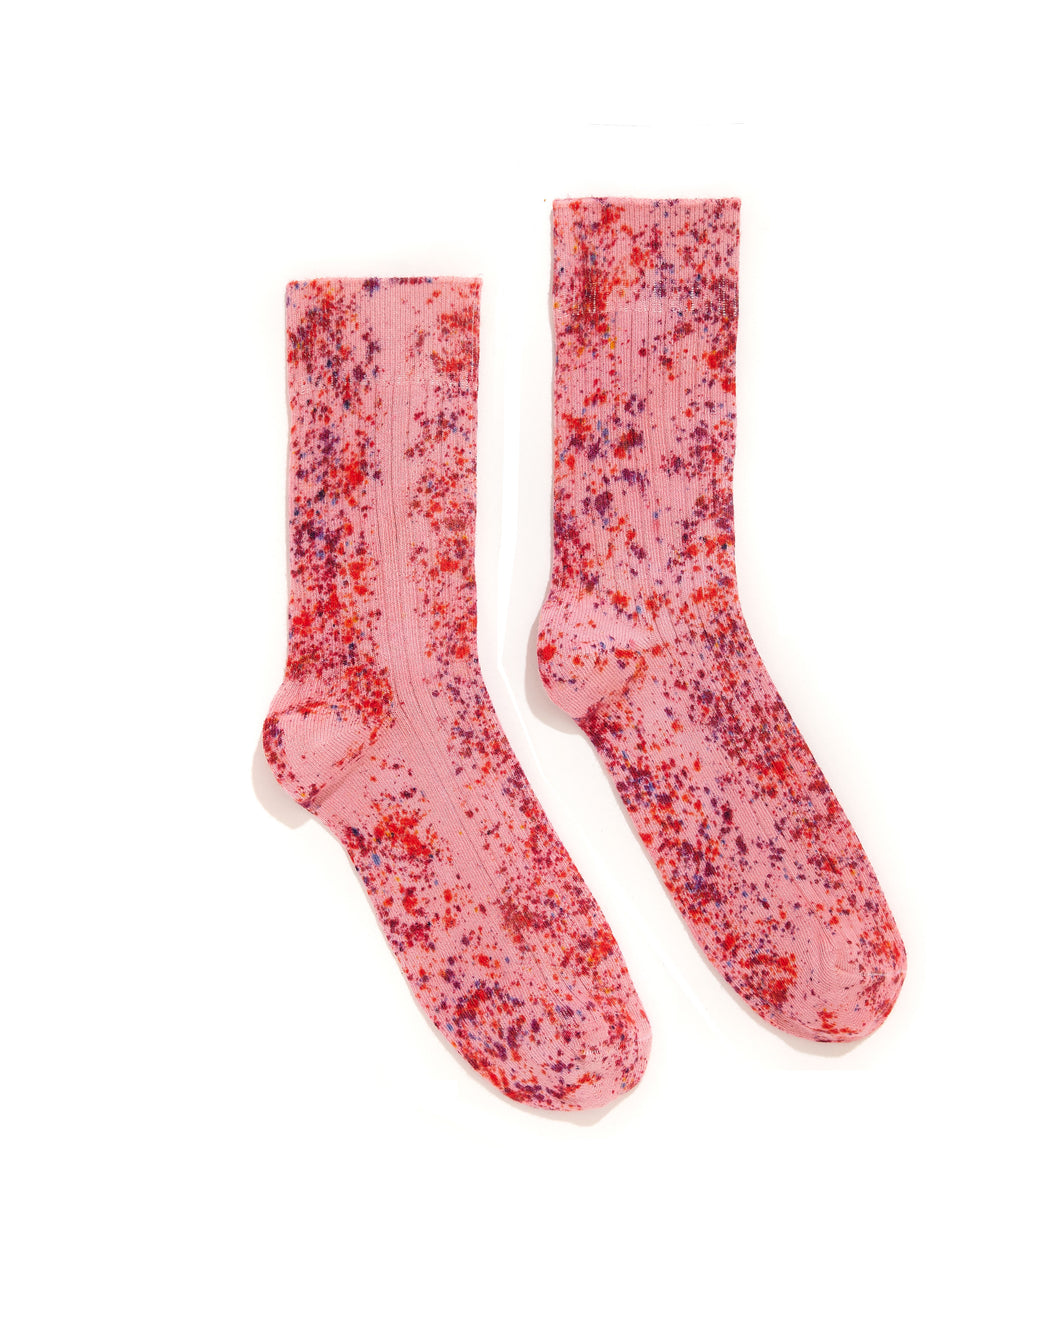 LILY SPECKLE SOCKS